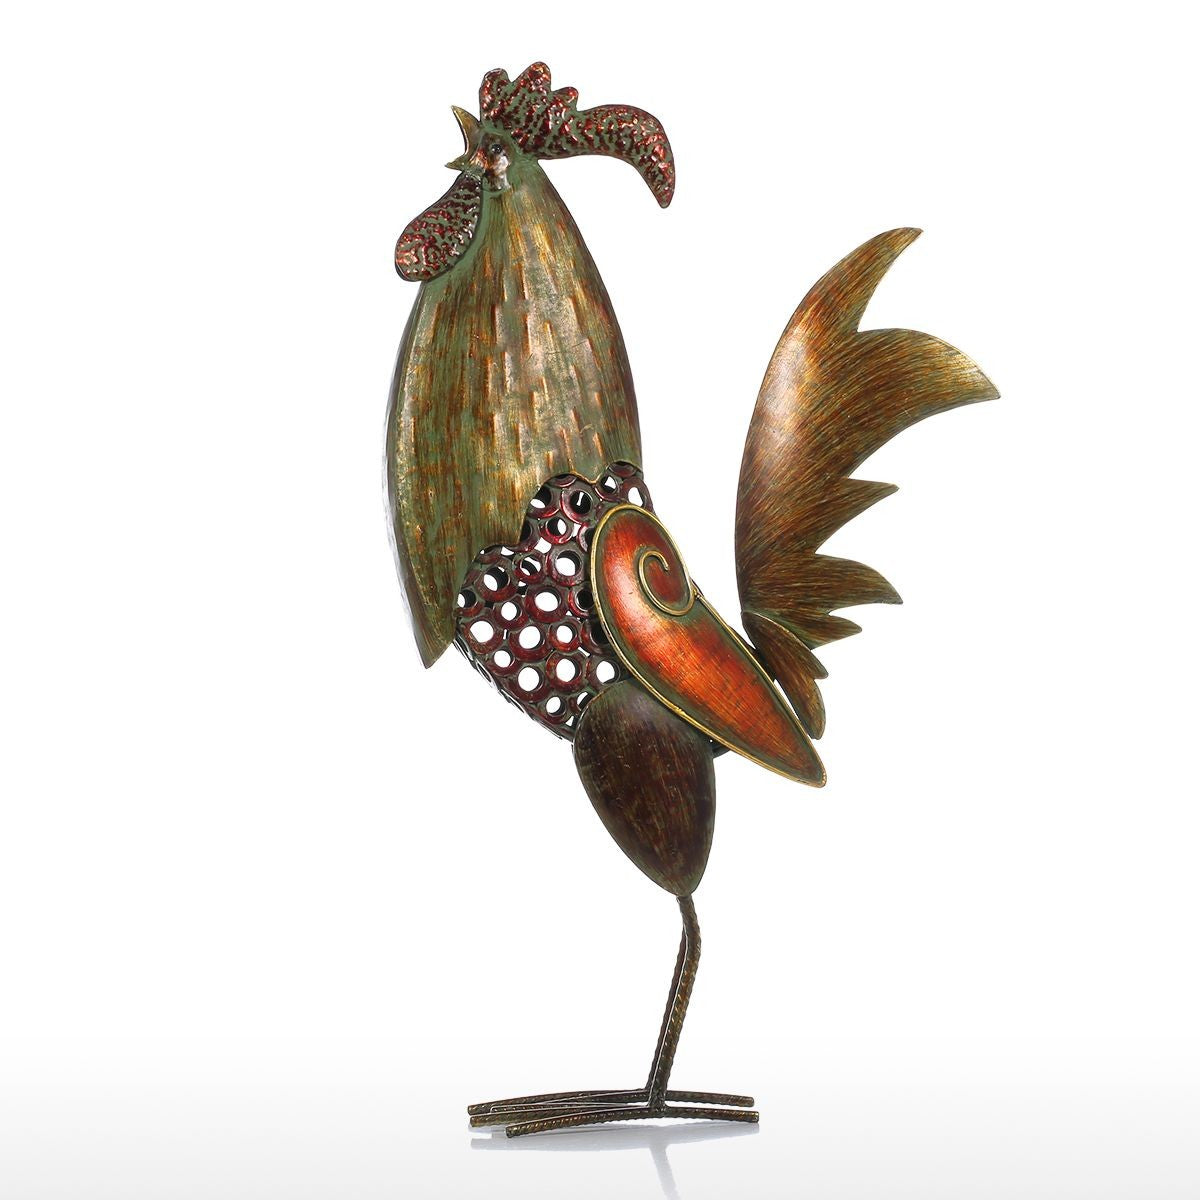 Rooster Decor and Rooster Kitchen Decor with Rustic Christmas Decor for Outdoor Christmas Decorations